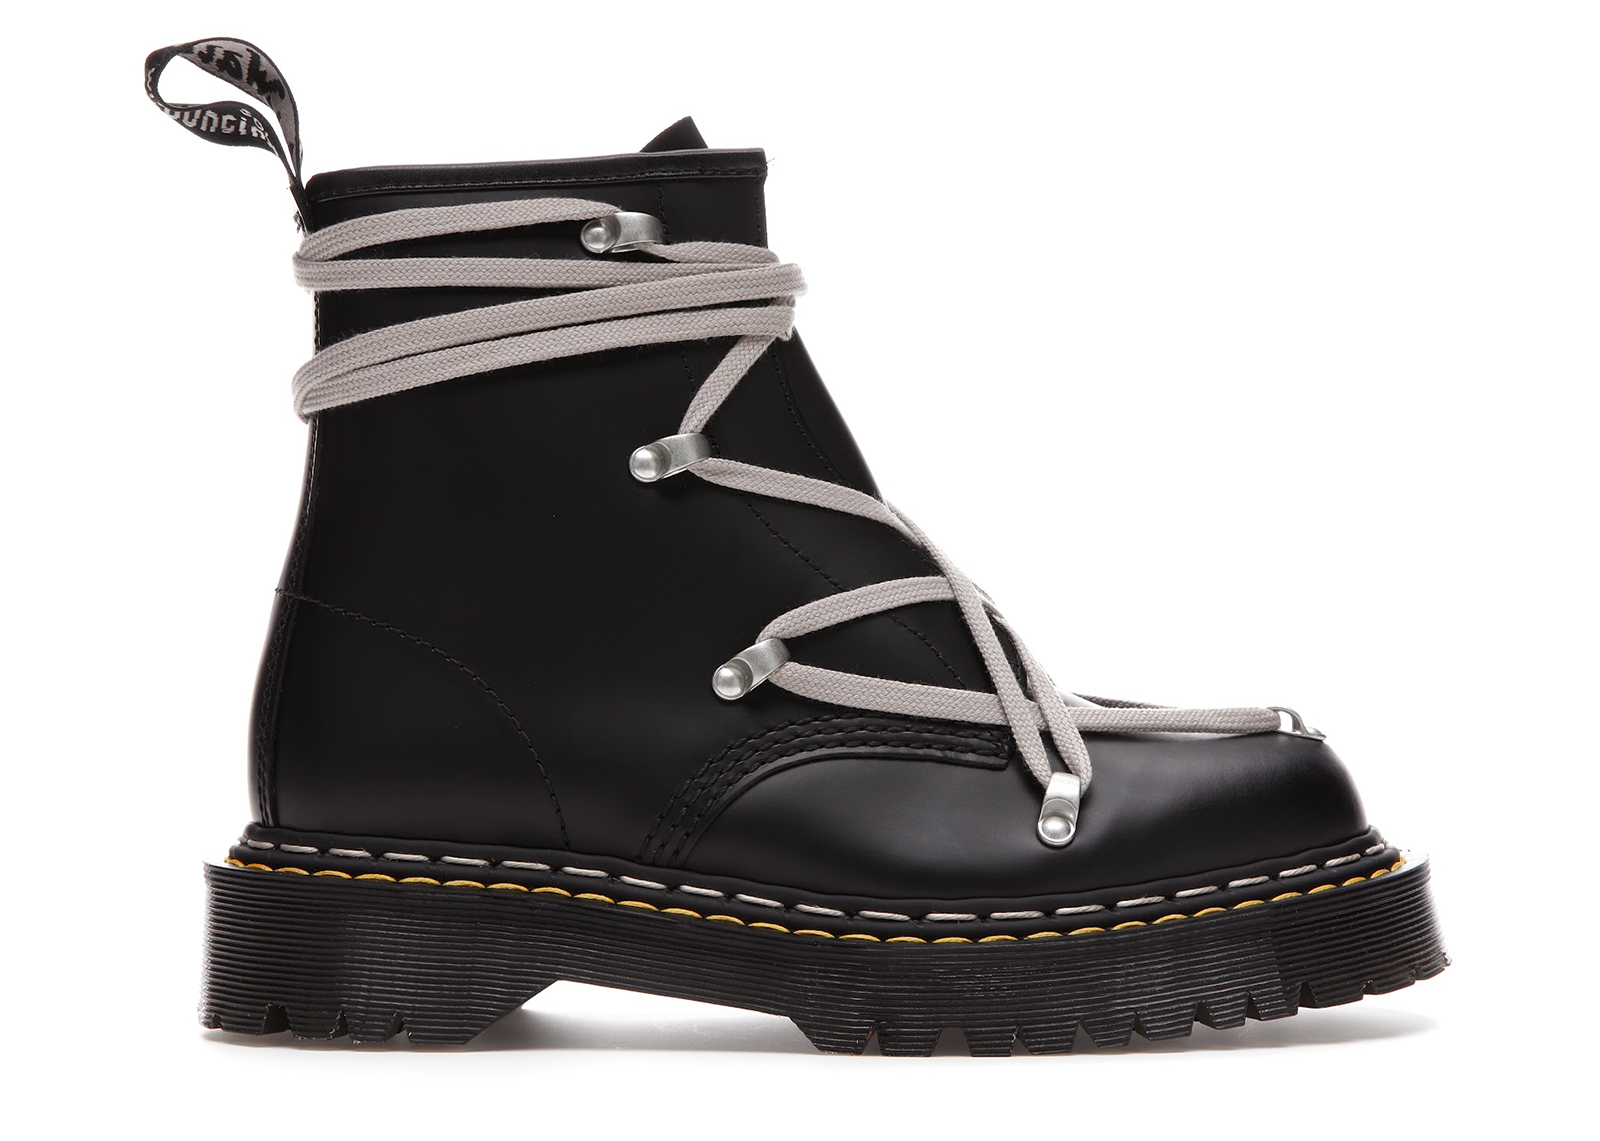 Dr. Martens 1460 Bex Leather Boot Rick Owens (Women's)